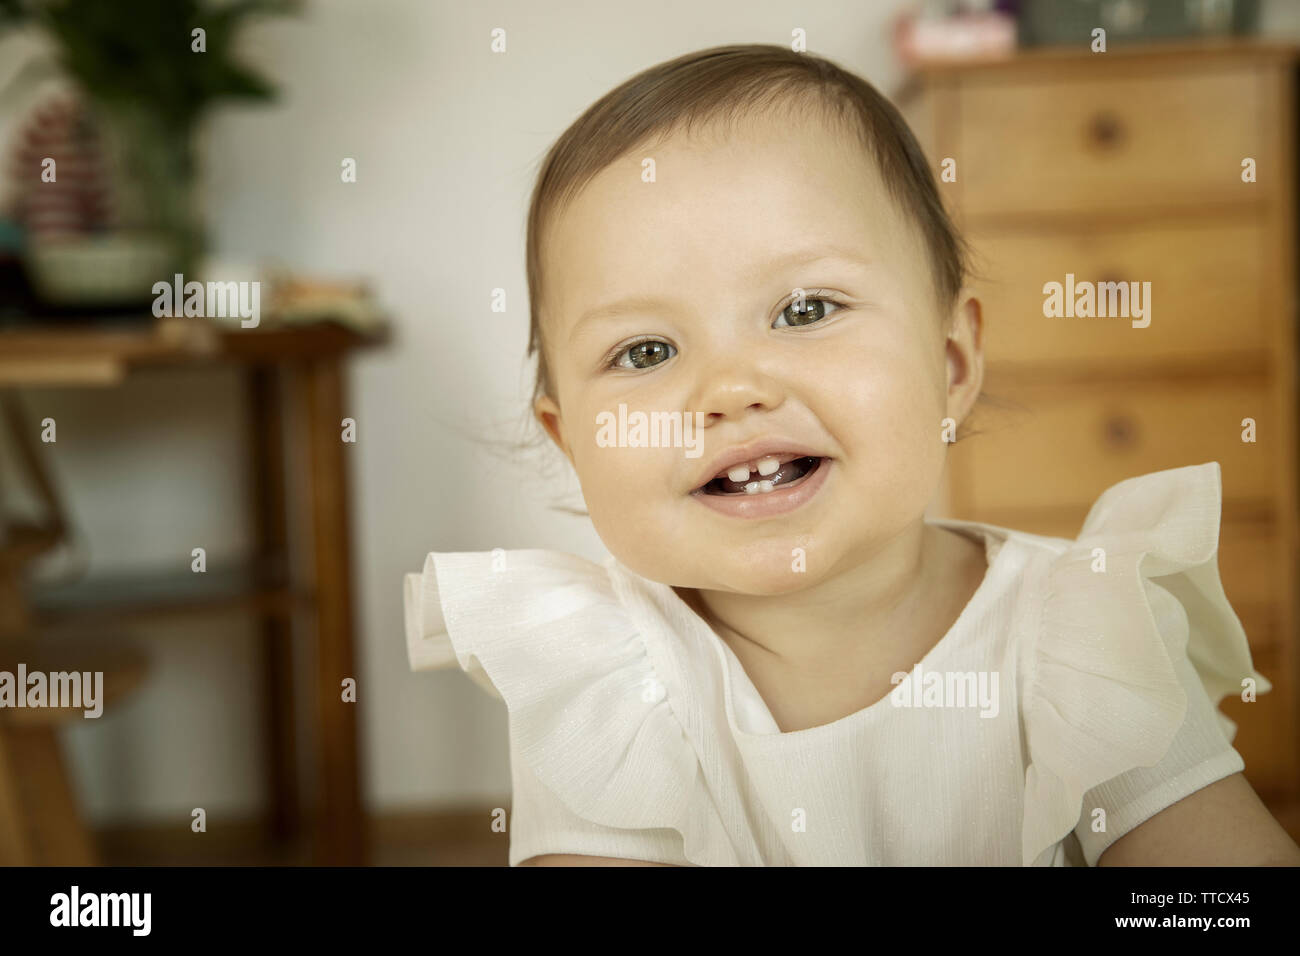 Cute little baby girl smiling Stock Photo